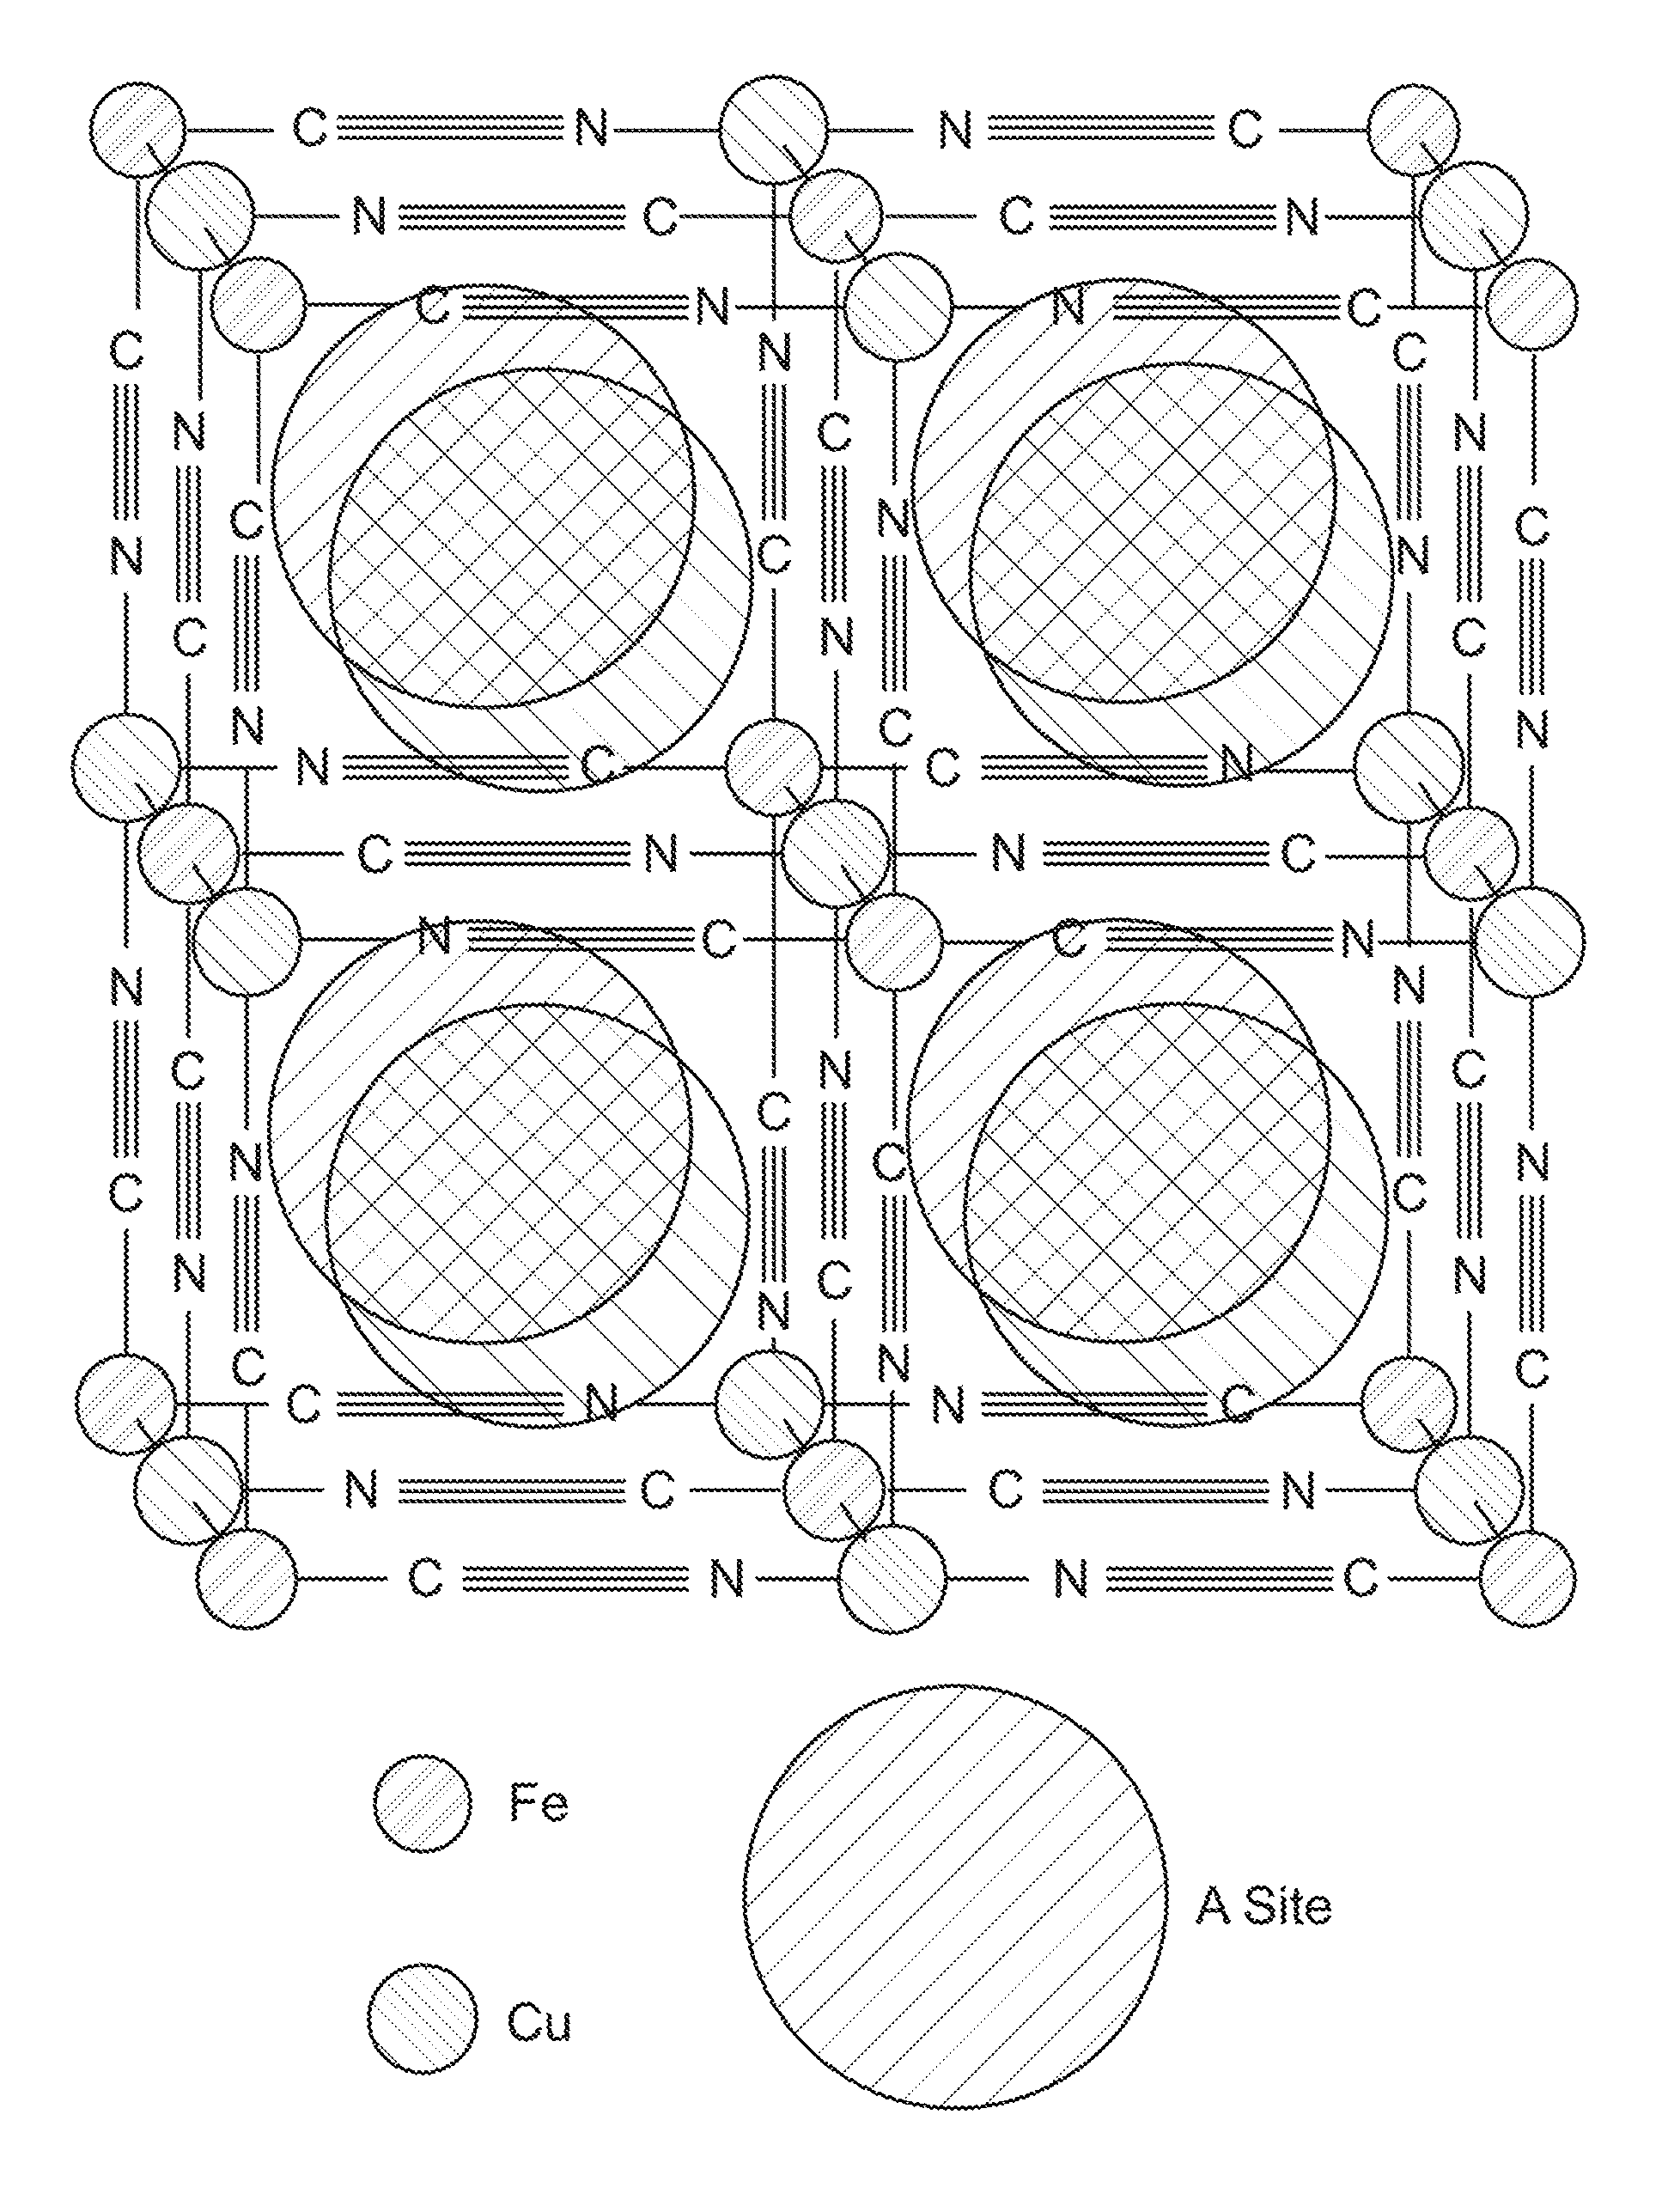 Cosolvent electrolytes for electrochemical devices